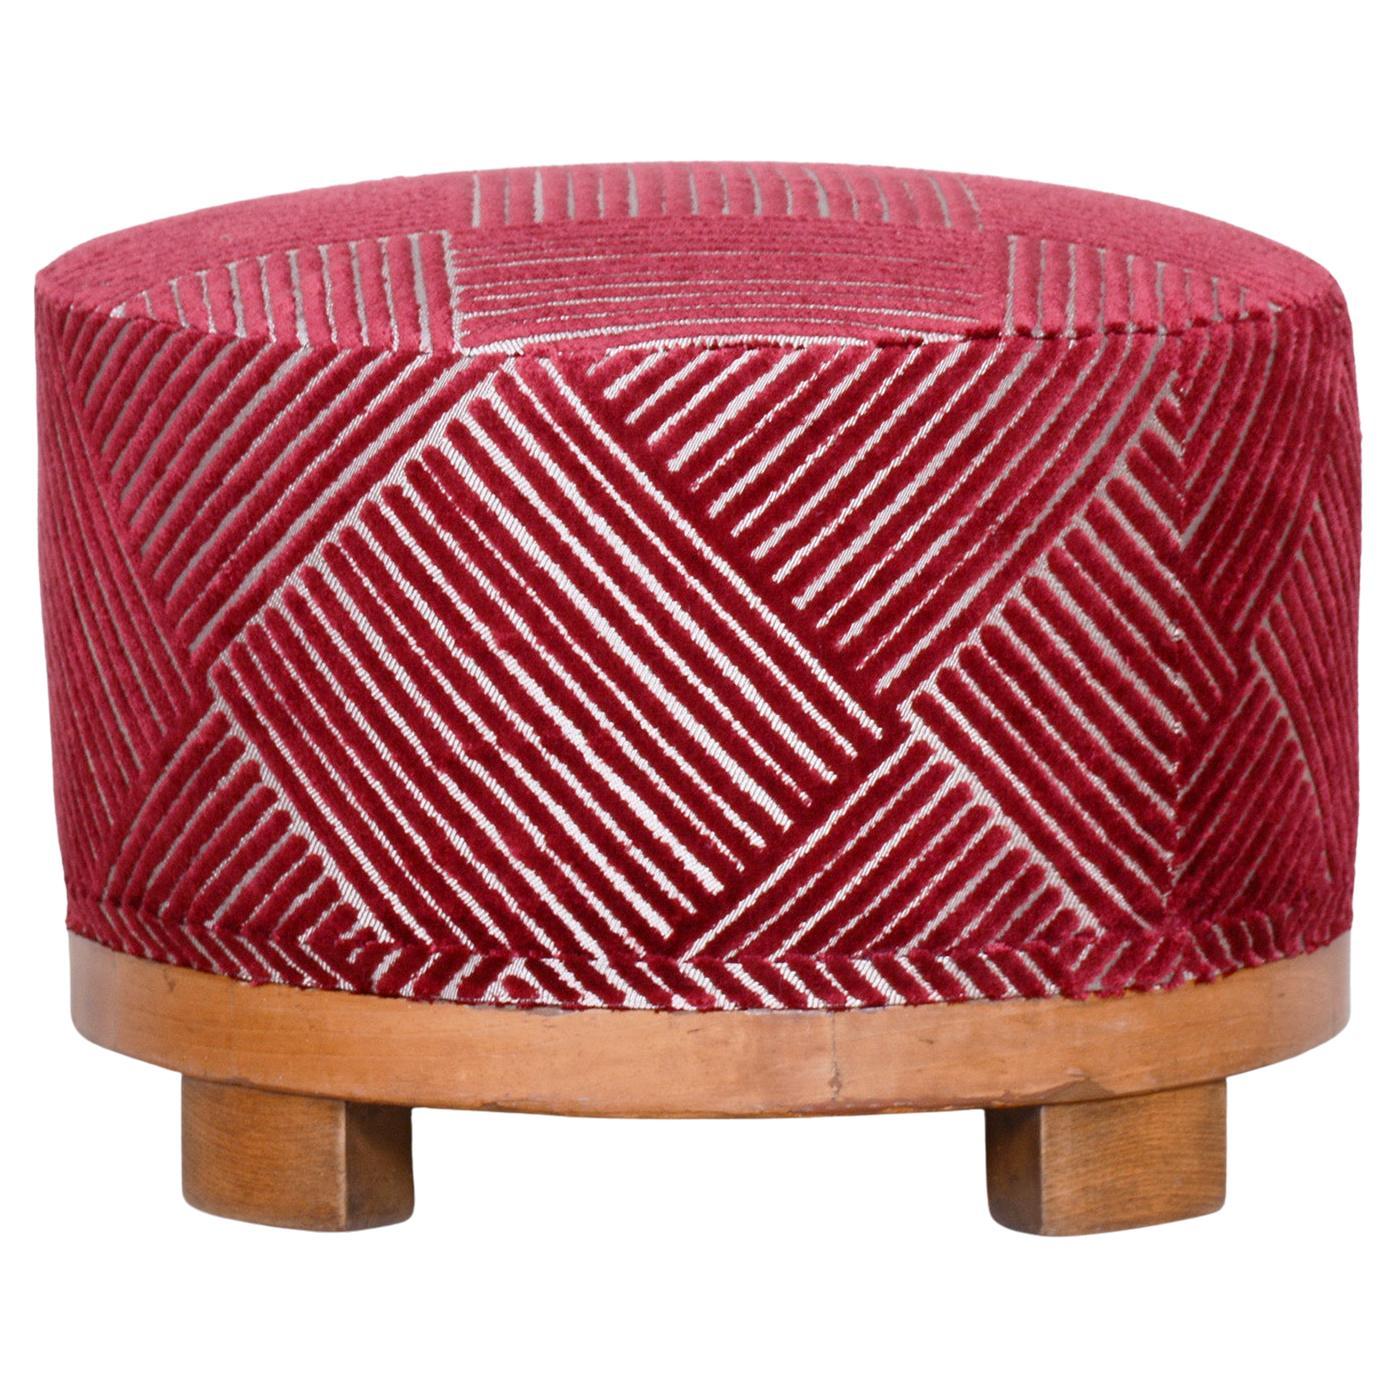 Red Art Deco Stool, Made in the 1920s, Fully Restored